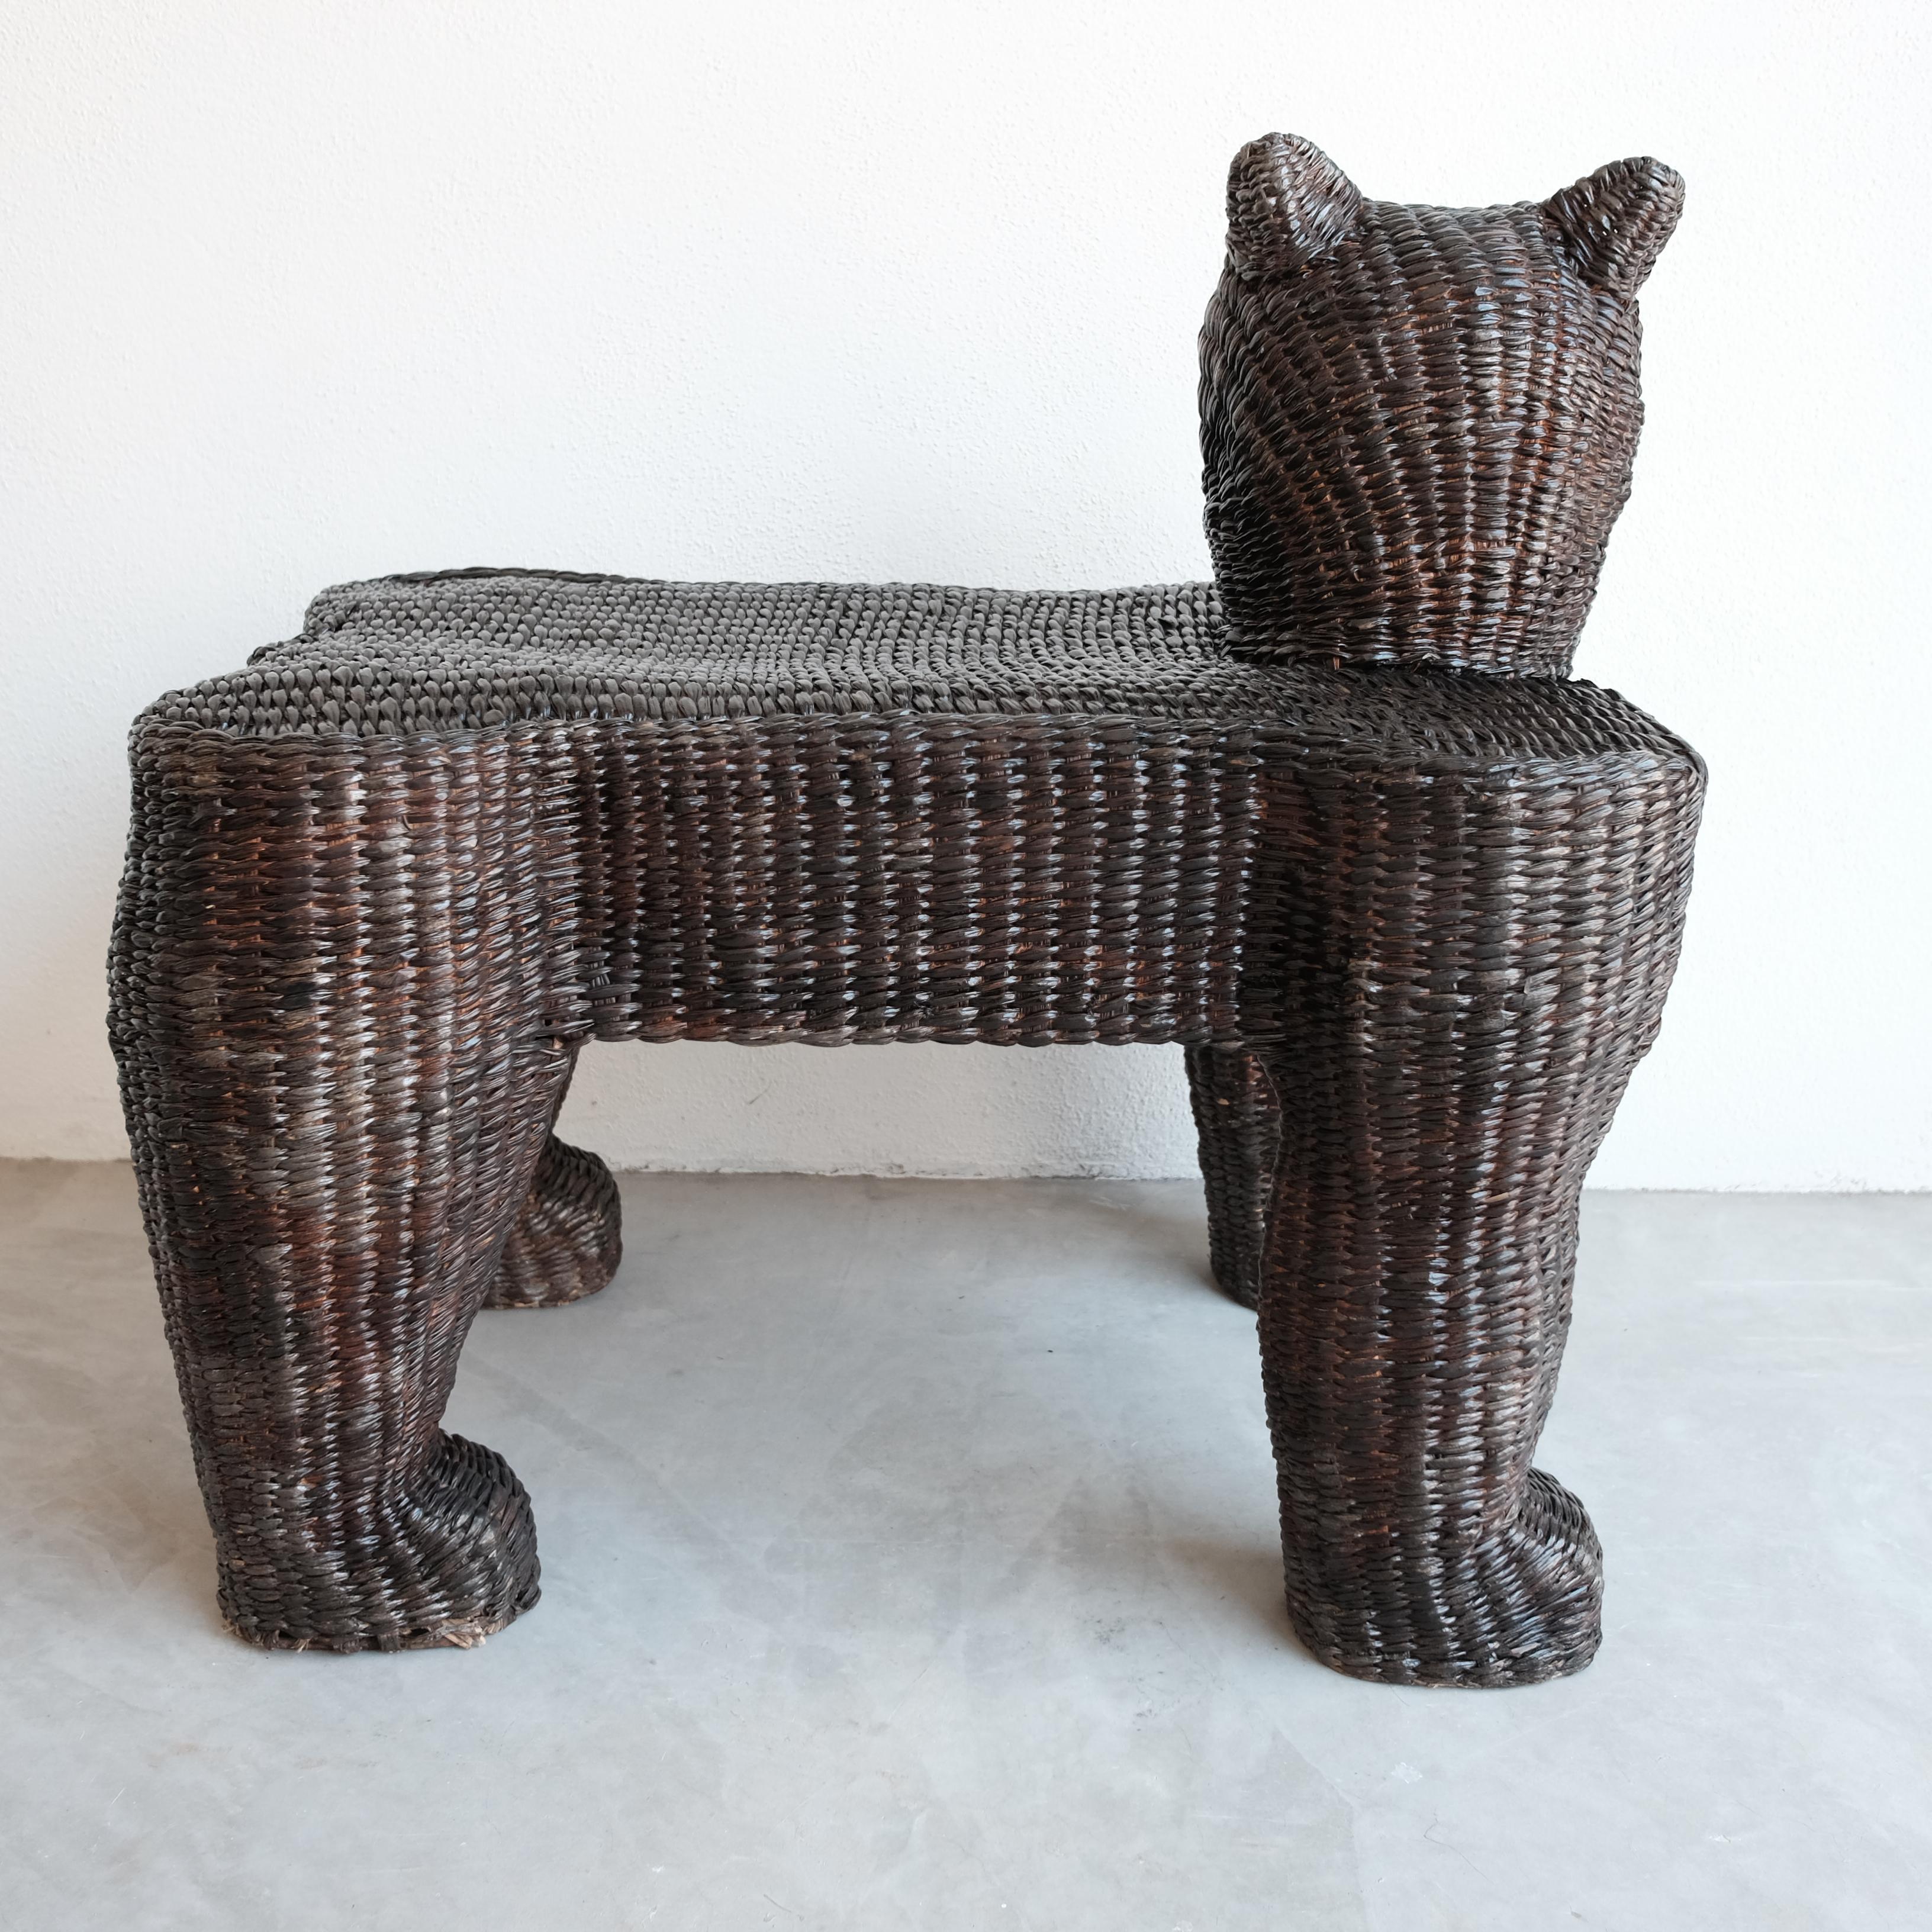 Pair of Coyote and Jaguar Benches by Mario Lopez Torres 1974 10